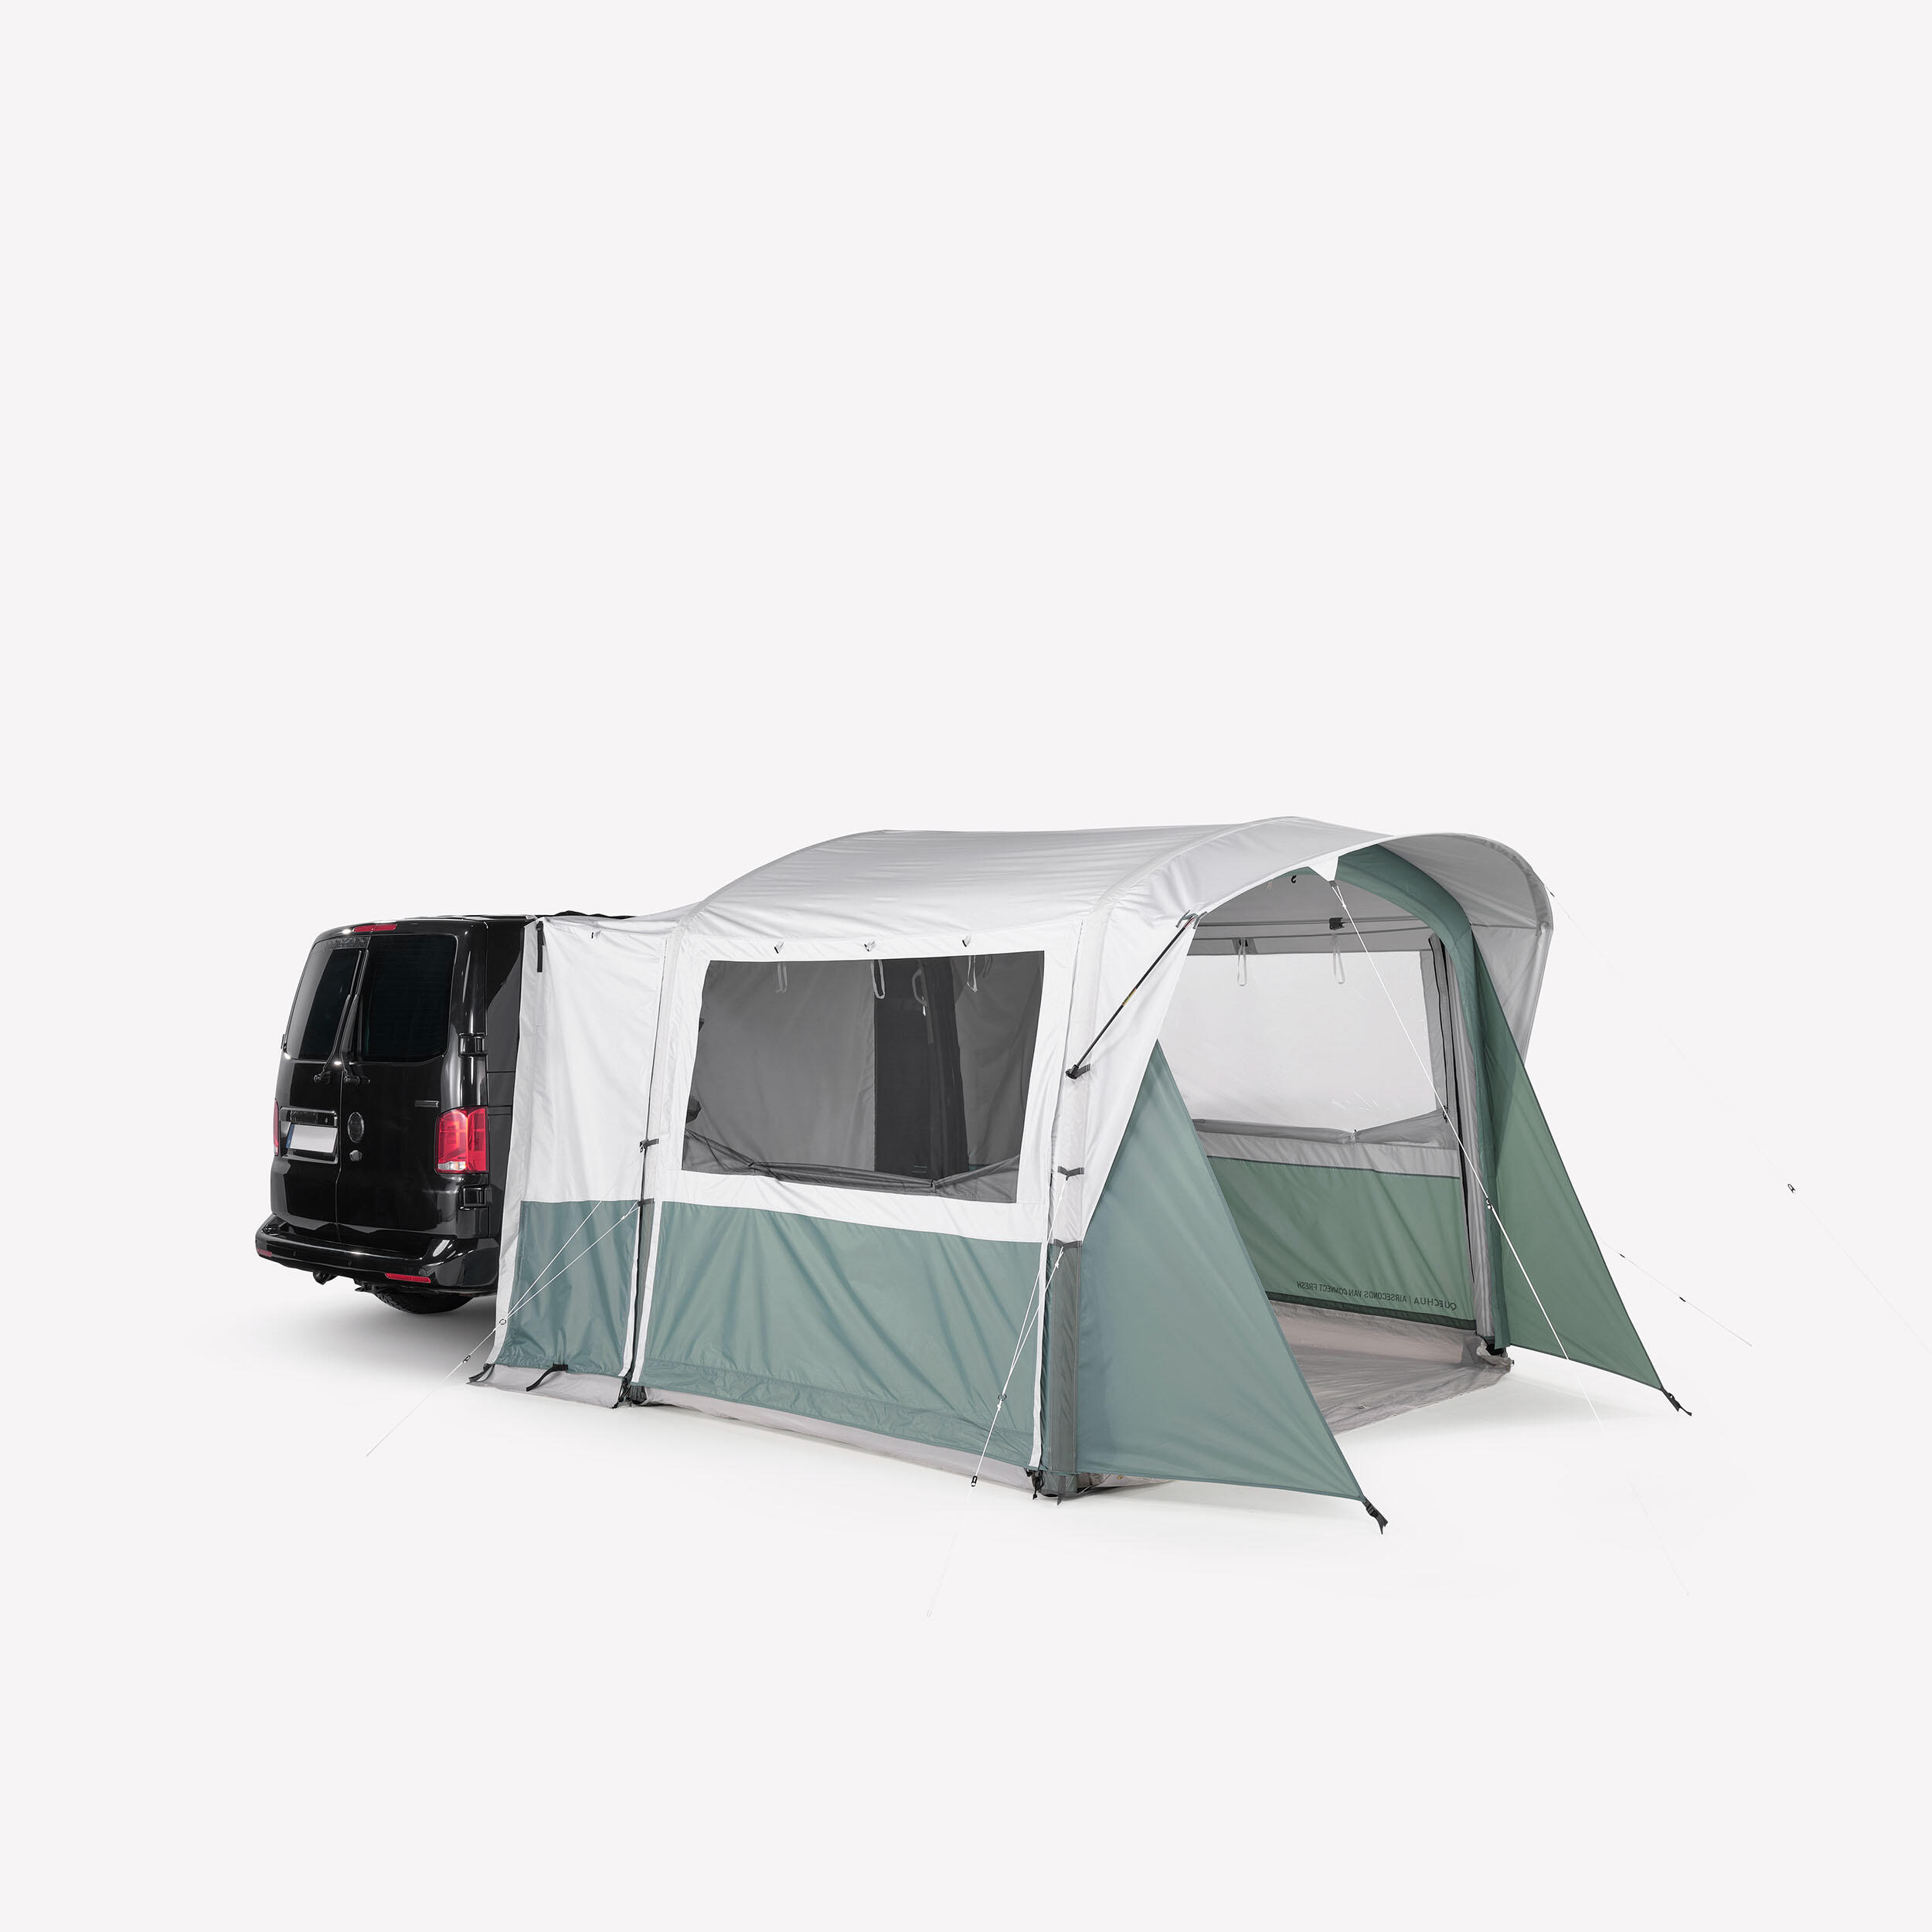 Van and truck inflatable canopy - Van Connect Air Seconds Fresh - 6 people 1/15